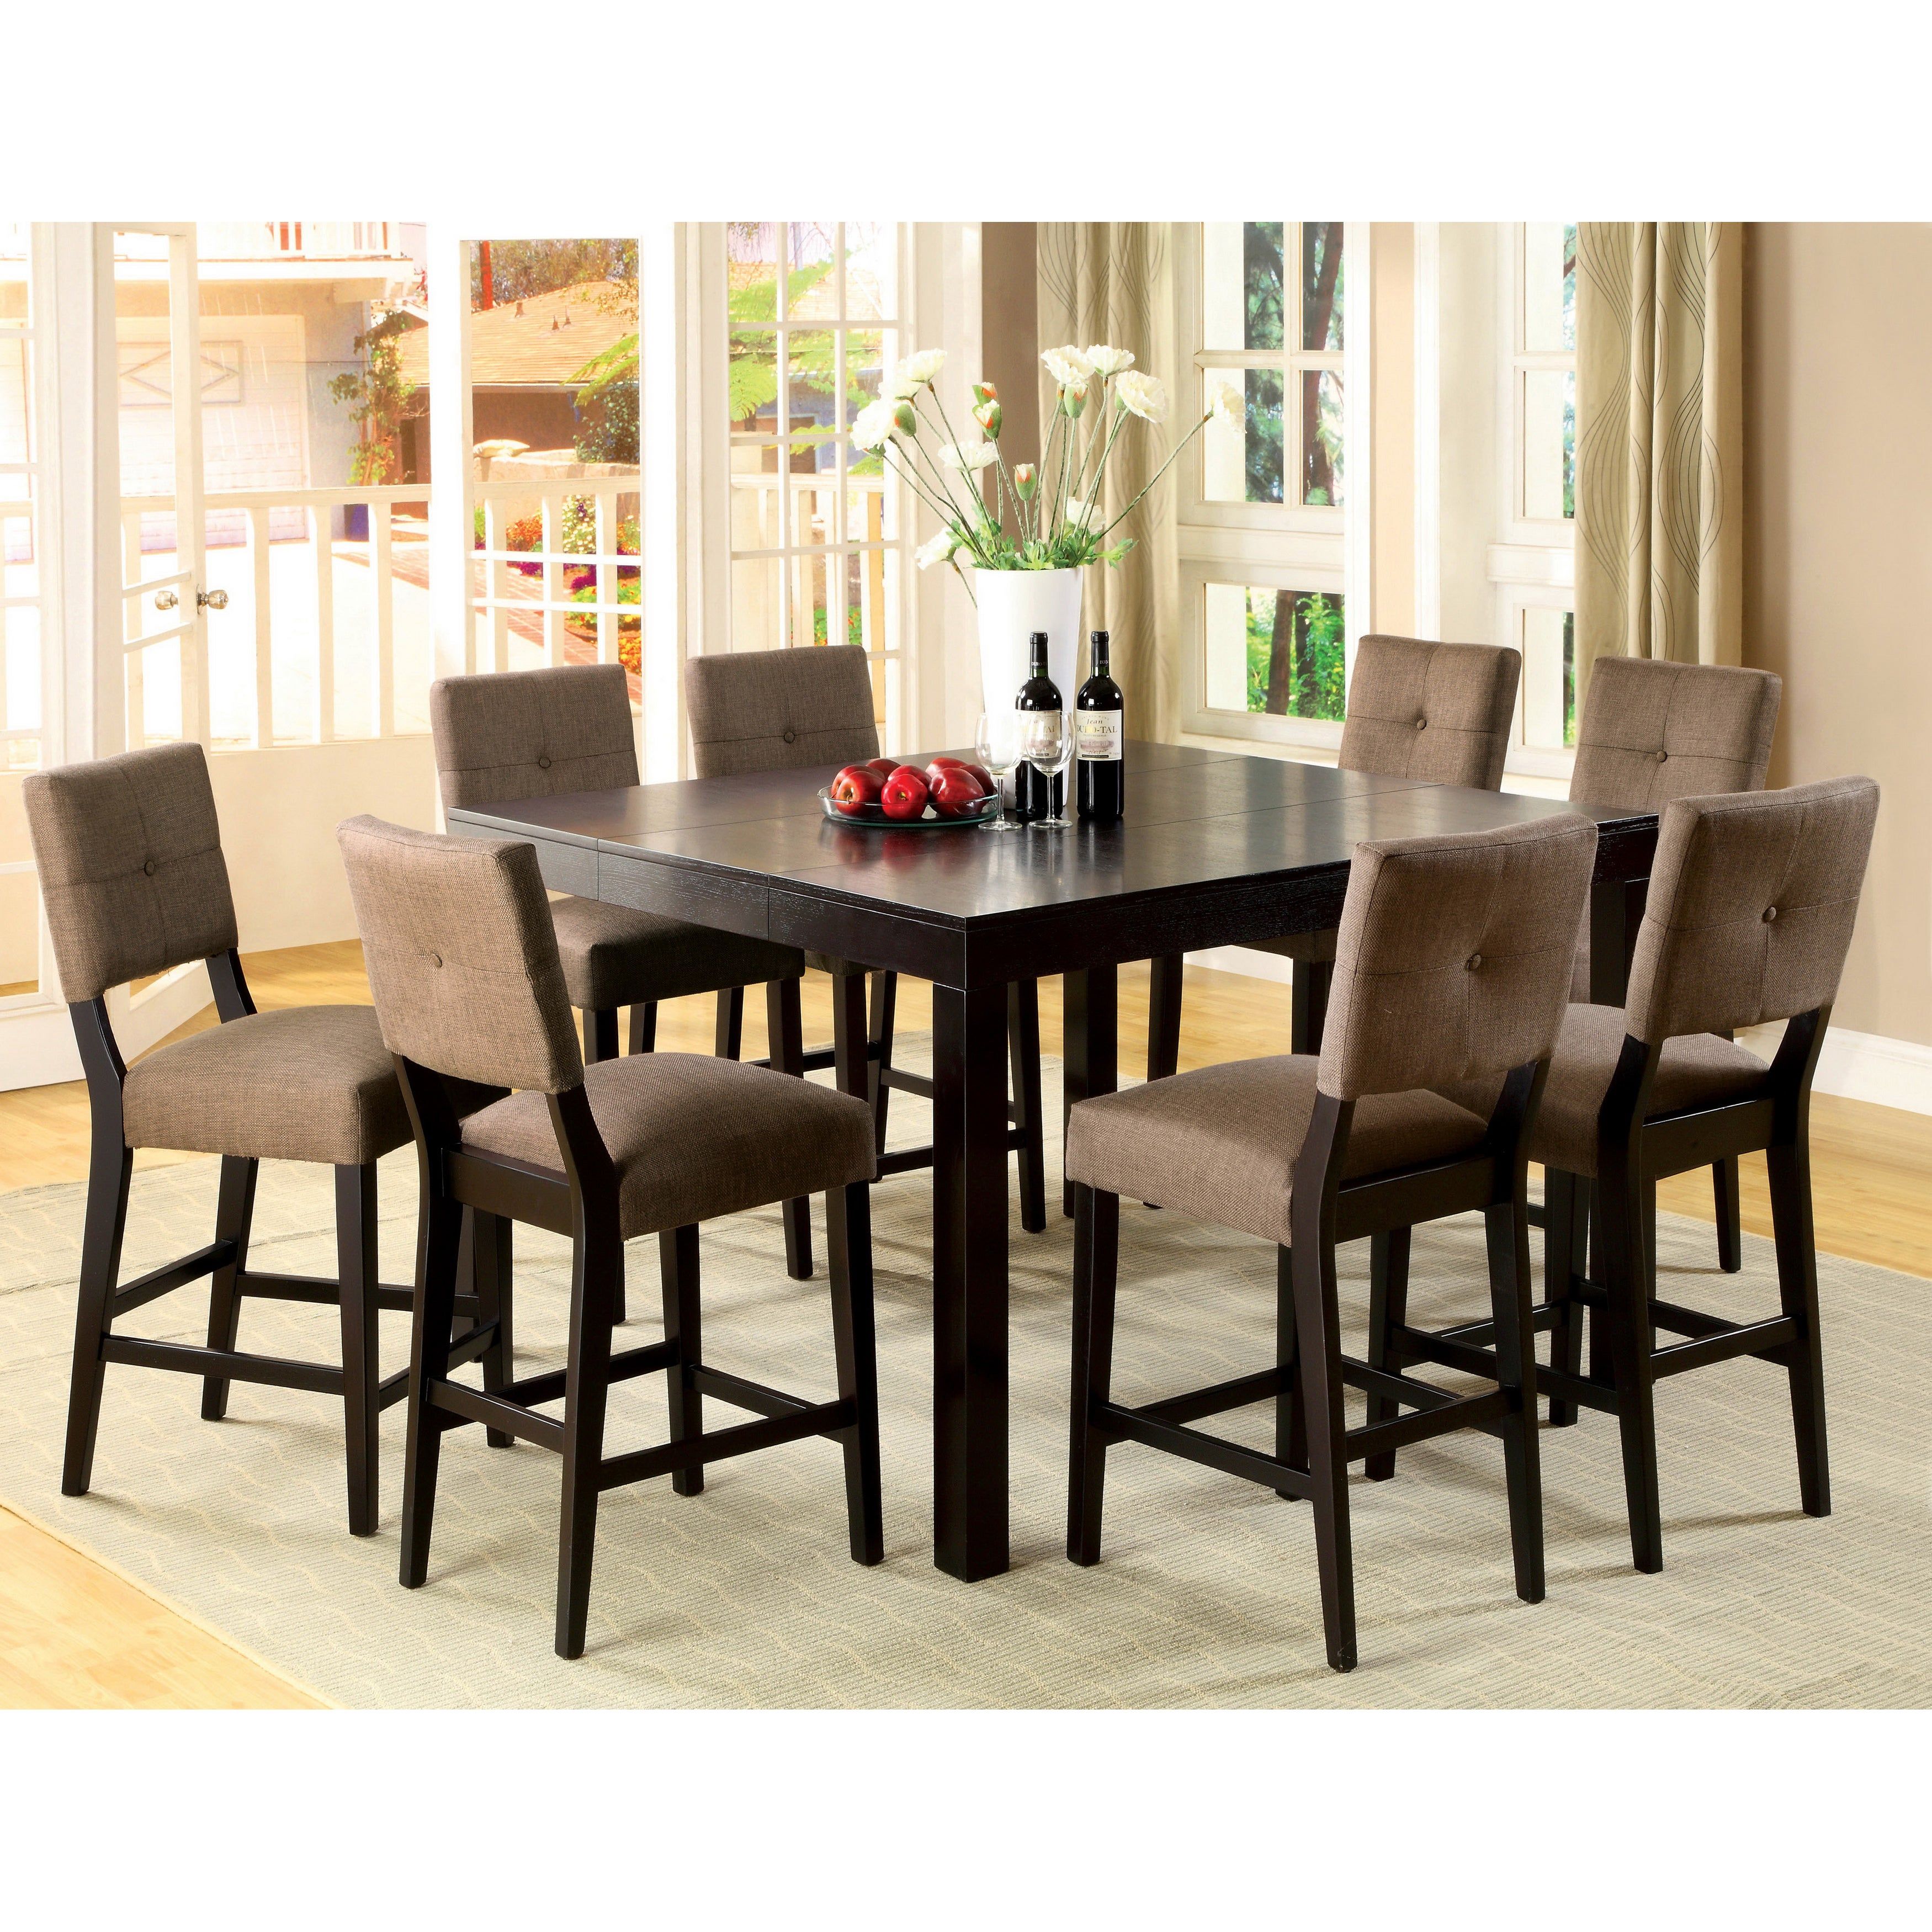 Wallflower 3 Piece Dining Sets With Regard To Best And Newest Shop Furniture Of America Catherine Espresso Counter Height Dining (View 4 of 20)